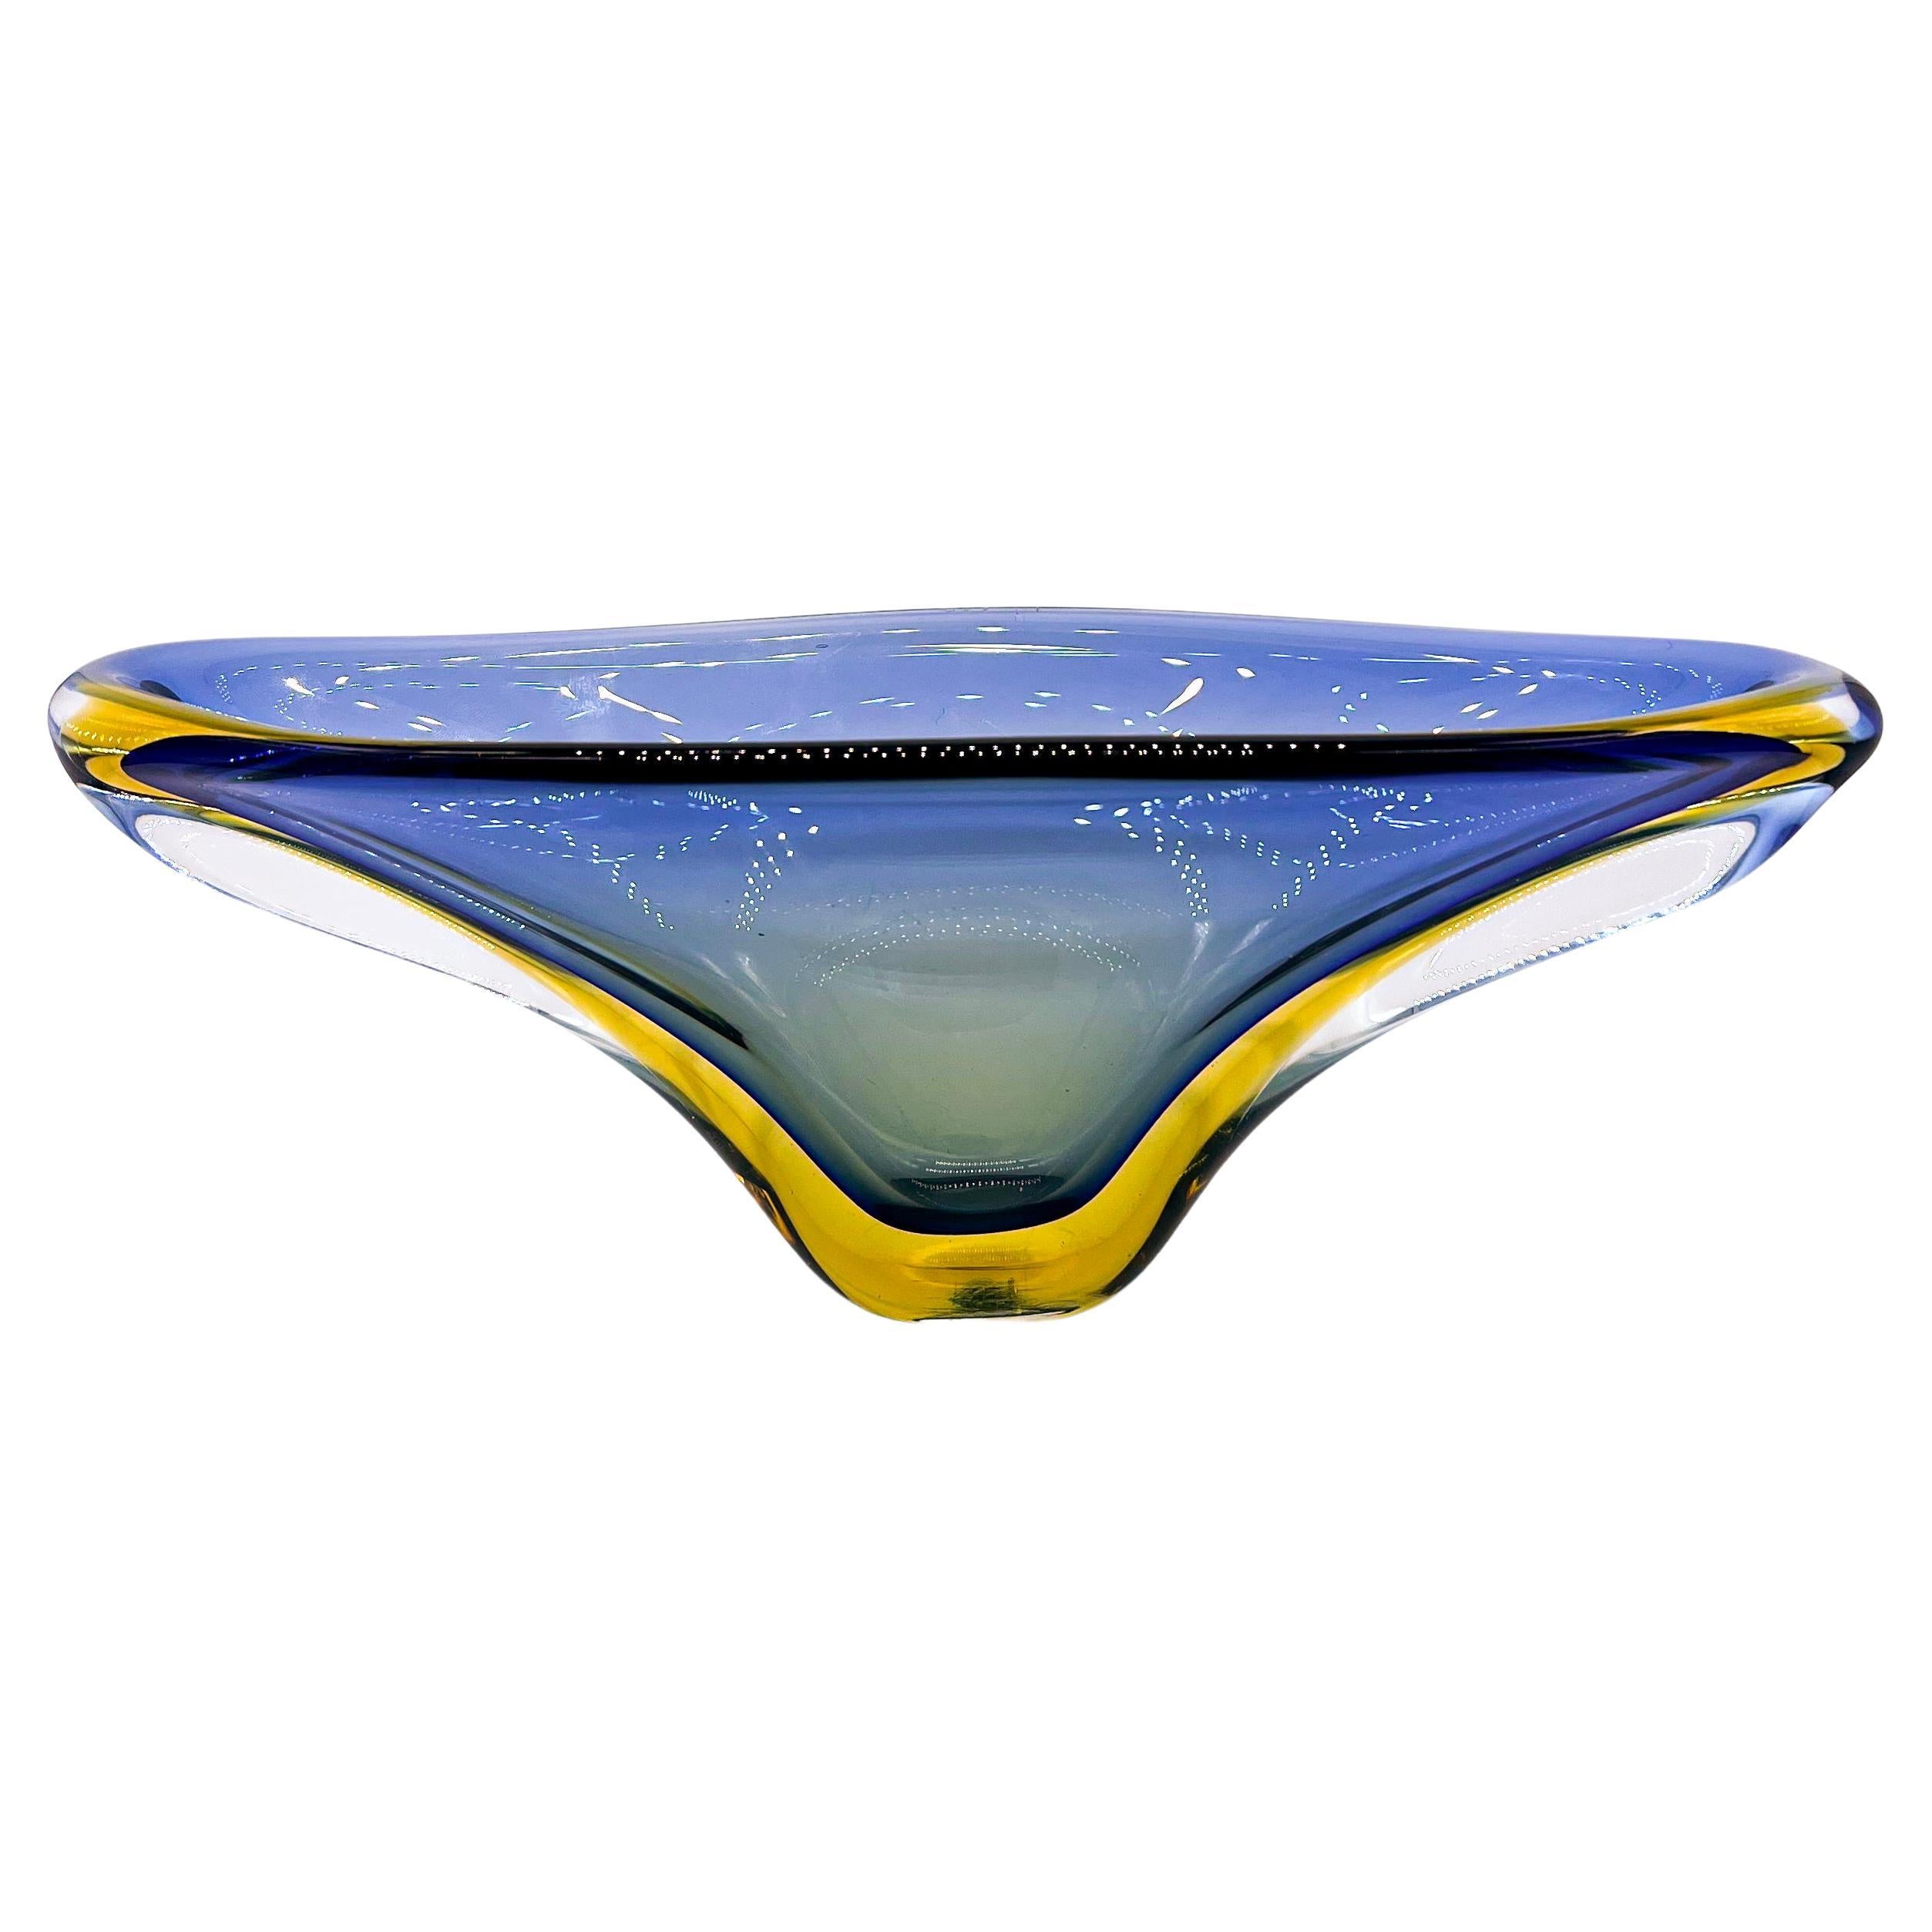 Vintage Big Murano Bowl in Blue and Yellow "Sommerso" Glass, Flavio Poli Style